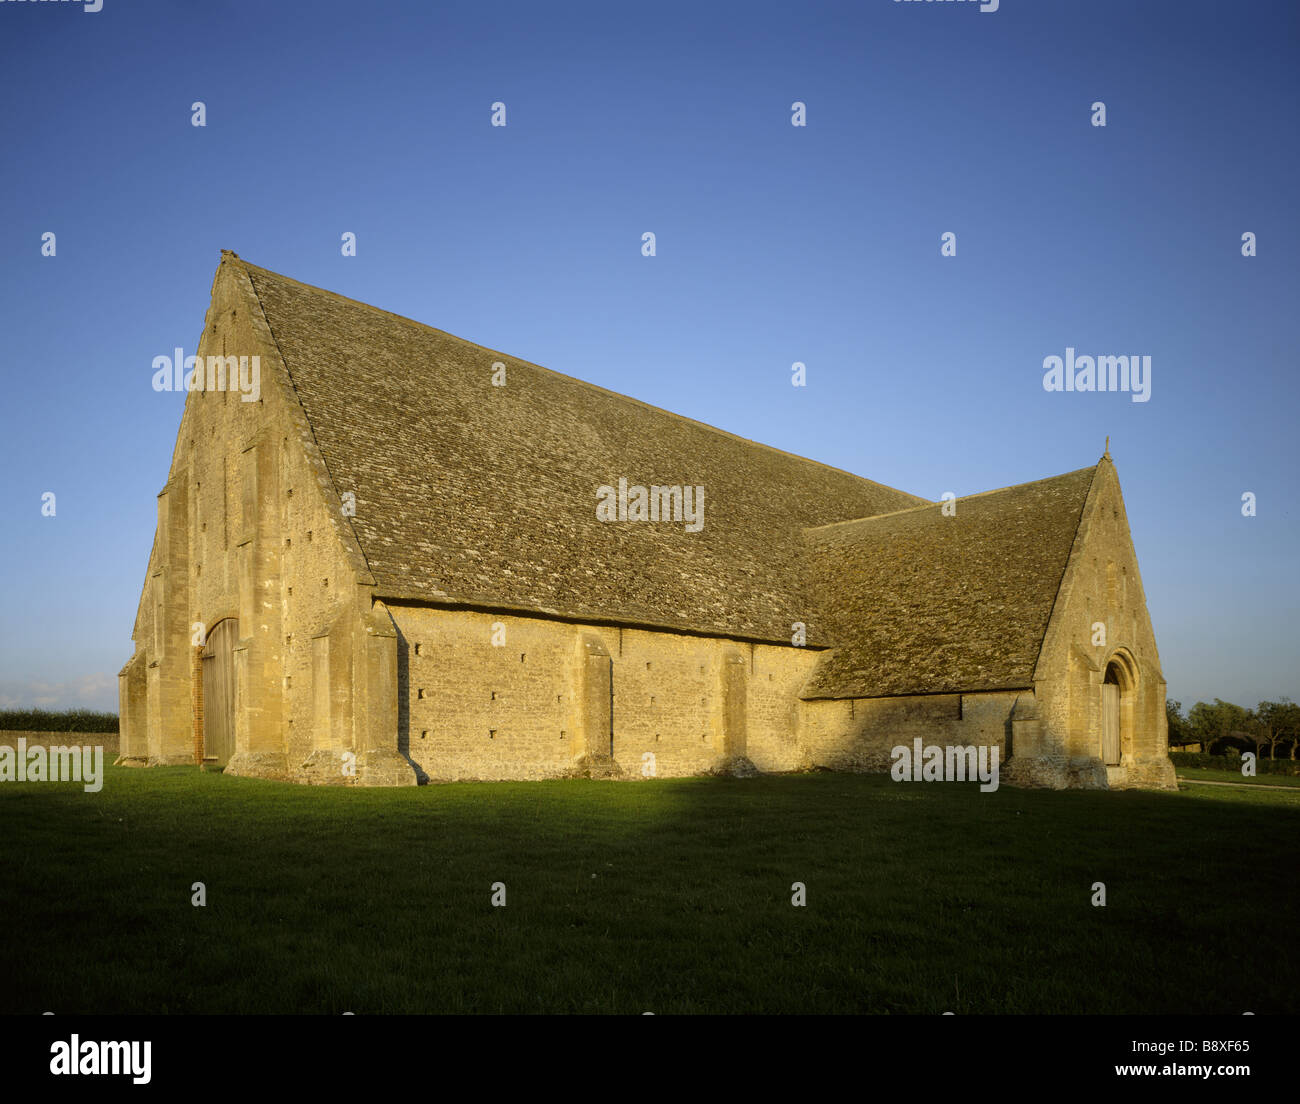 The Barn at Great Coxwell a stone built C13th monastic barn with stone tiles Stock Photo